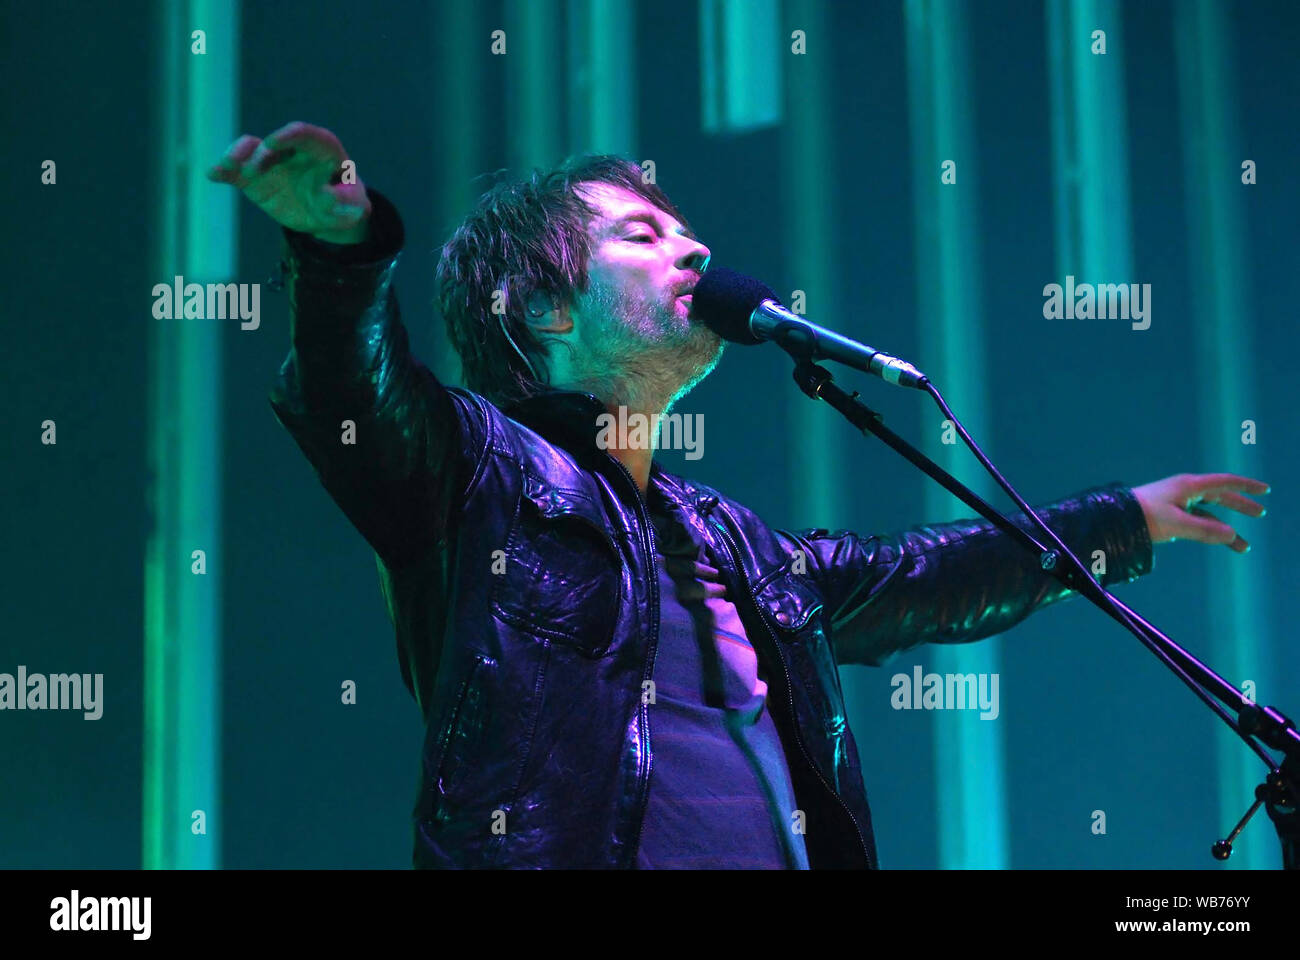 Rio de Janeiro, Brazil, March 20, 2009. Vocalist Thom Yorke of the band Radiohead during show at the Apoteose Square in the city of Rio de Janeiro Stock Photo